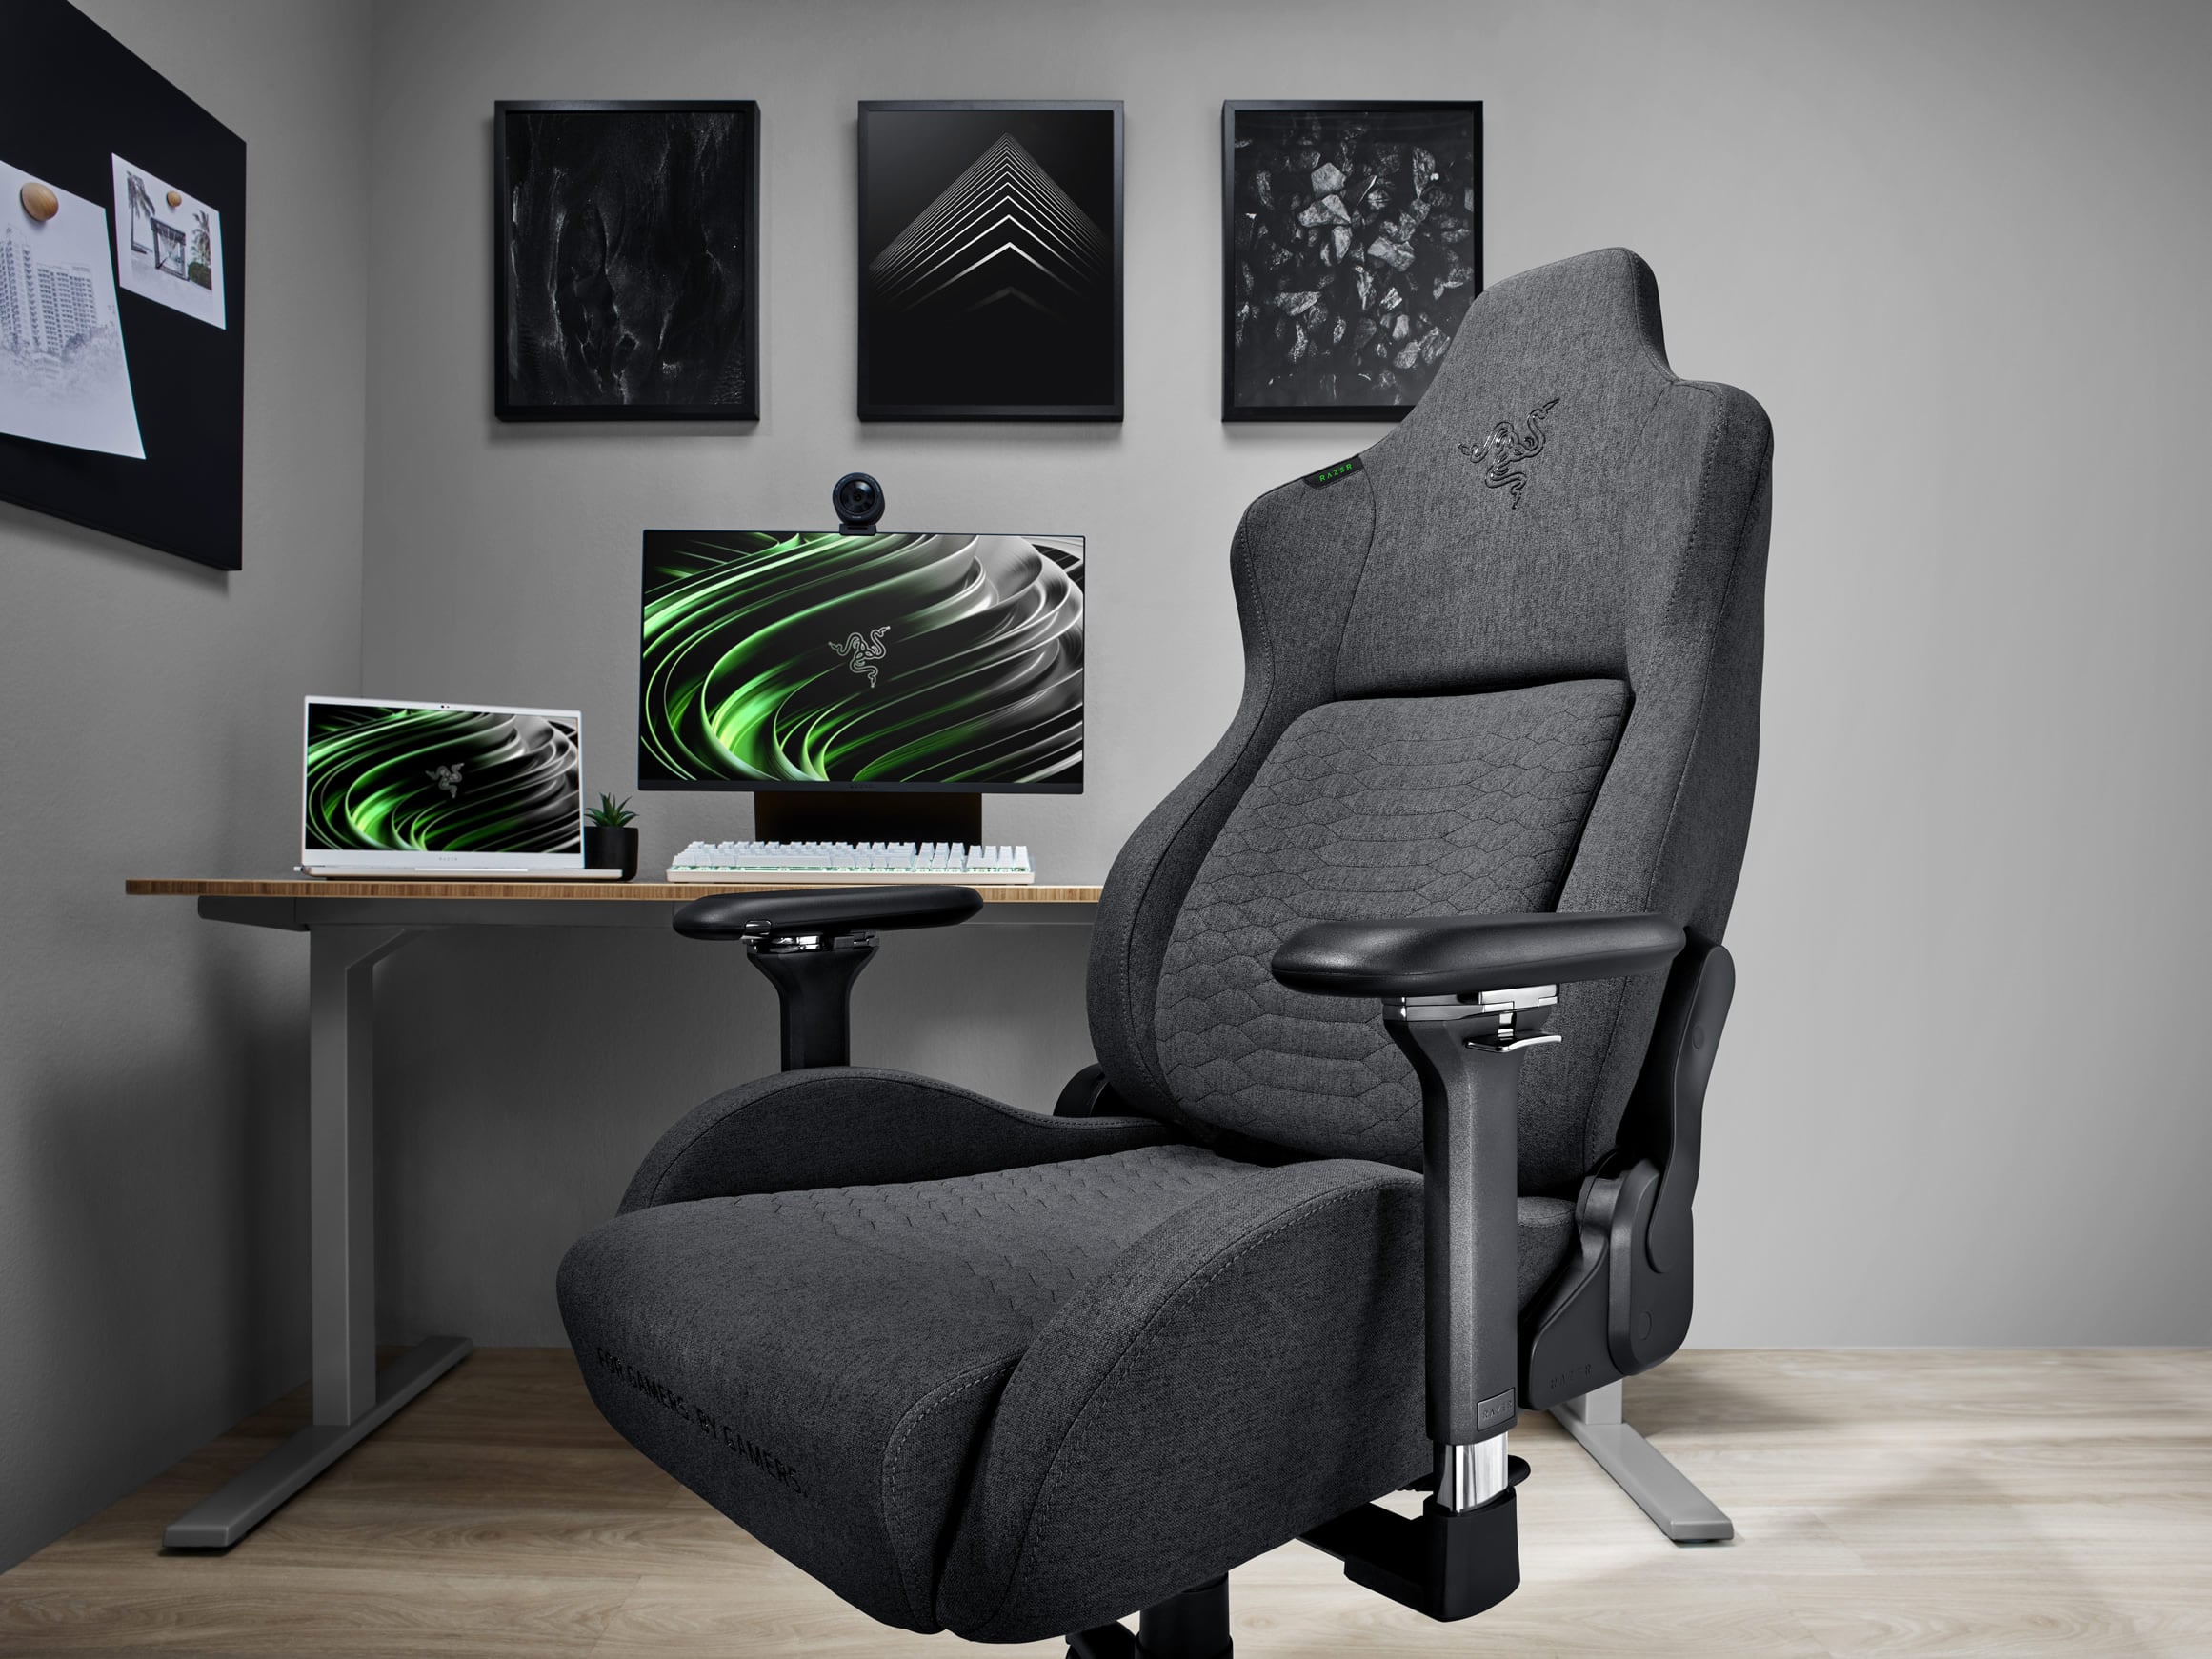 Razer launches its new Iskur and Iskur XL gaming chairs with fabric finish